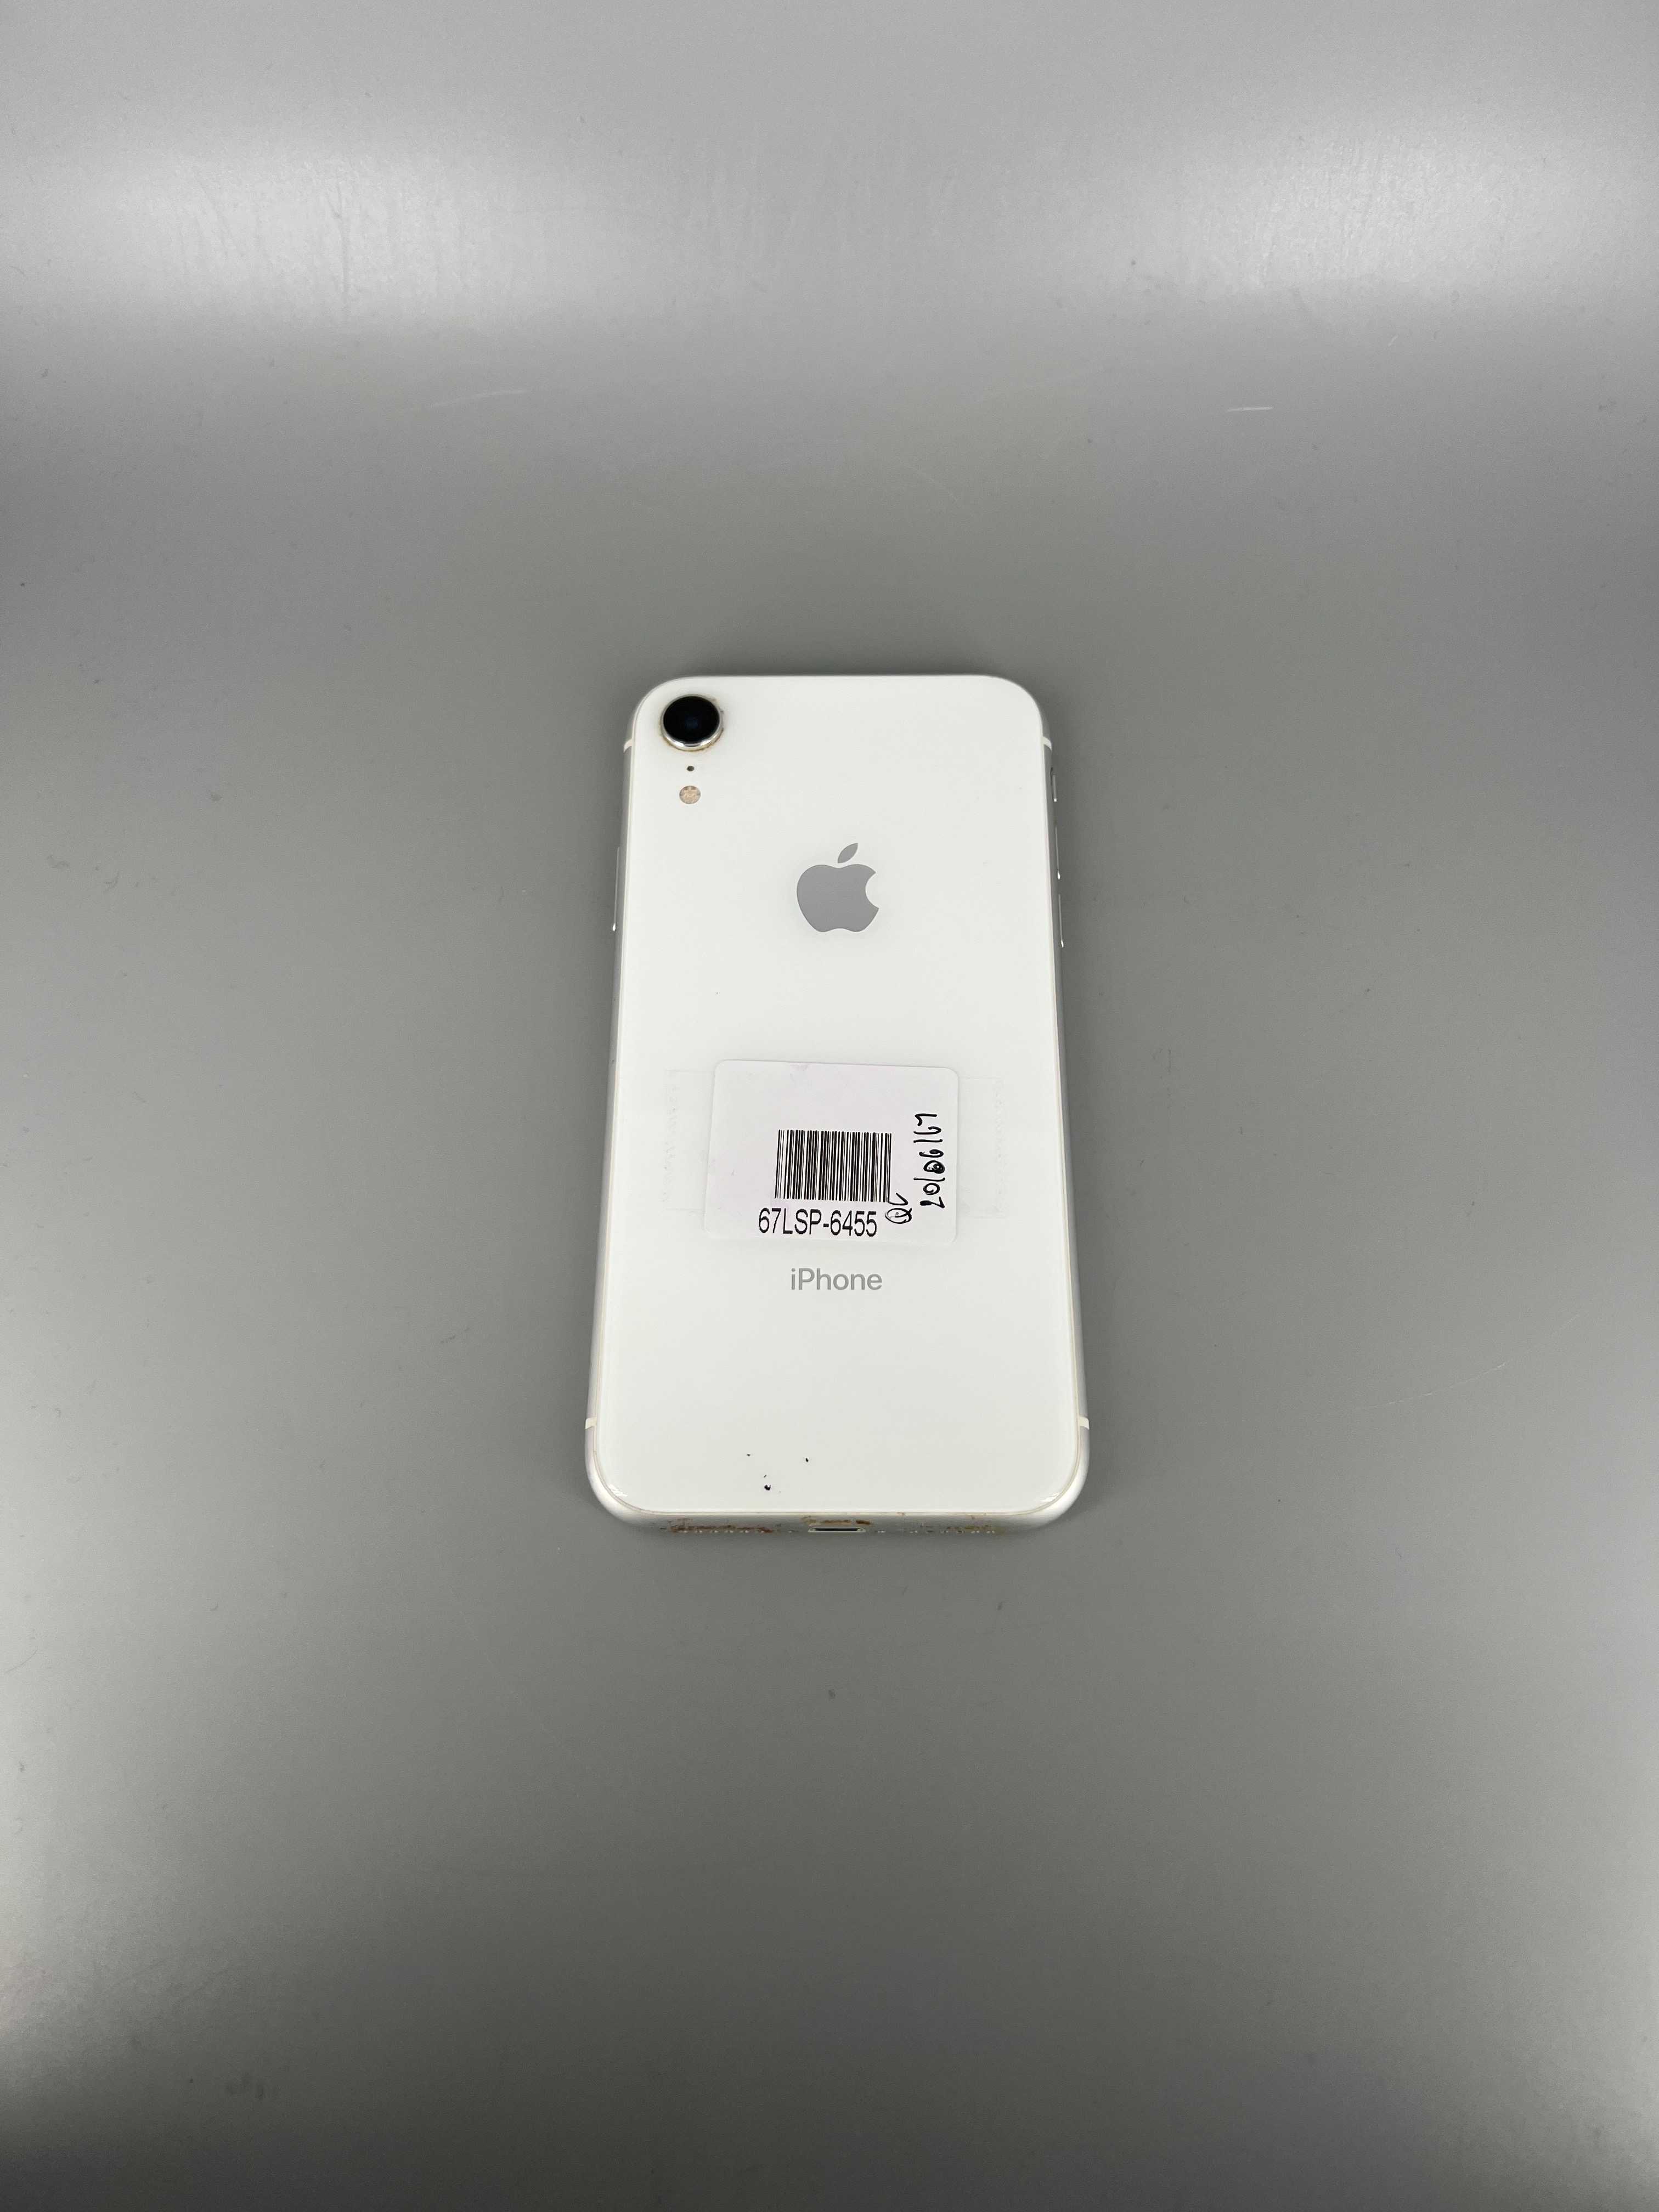 Used Apple iPhone XR 64GB White 67LSP-6455